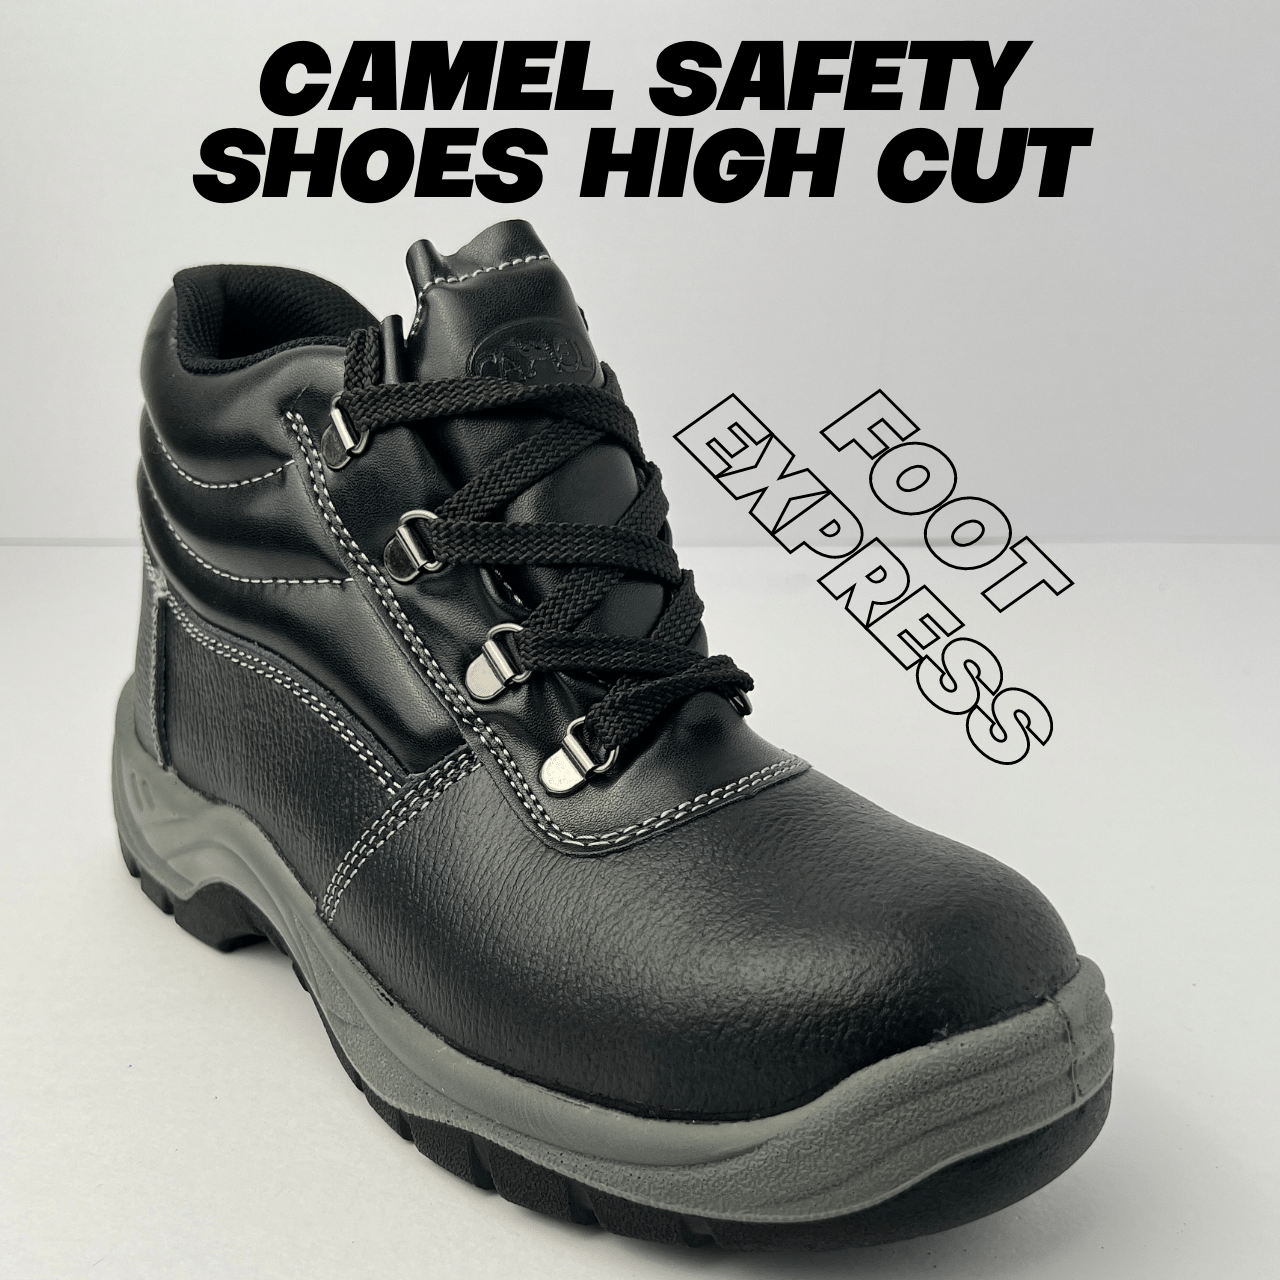 CAMEL Safety Shoes Steel Toe High Cut / Low Cut Original Real Leather ...